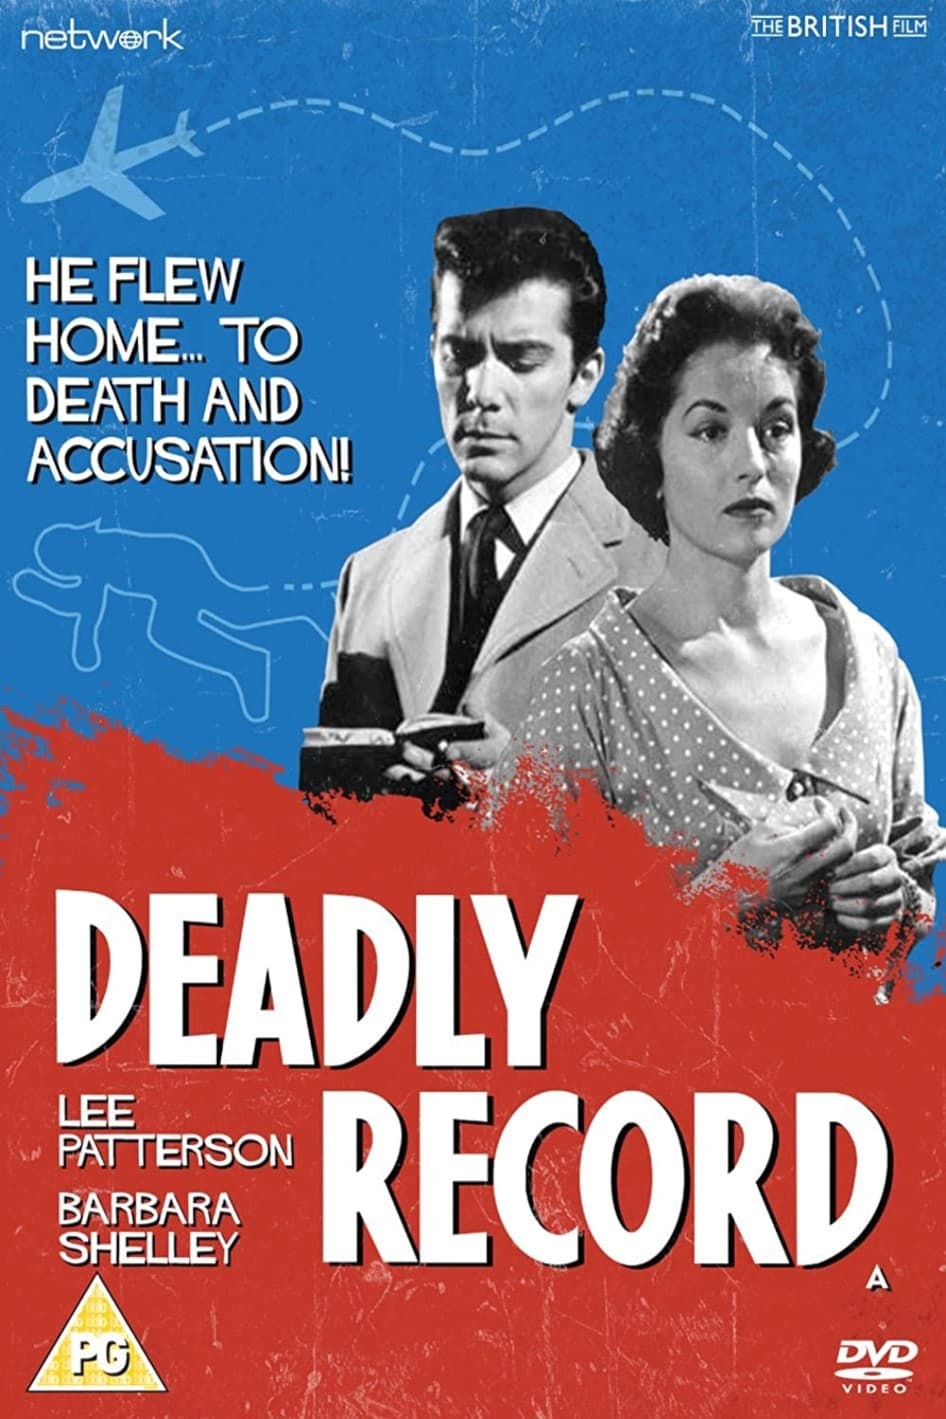 Deadly Record (1959)